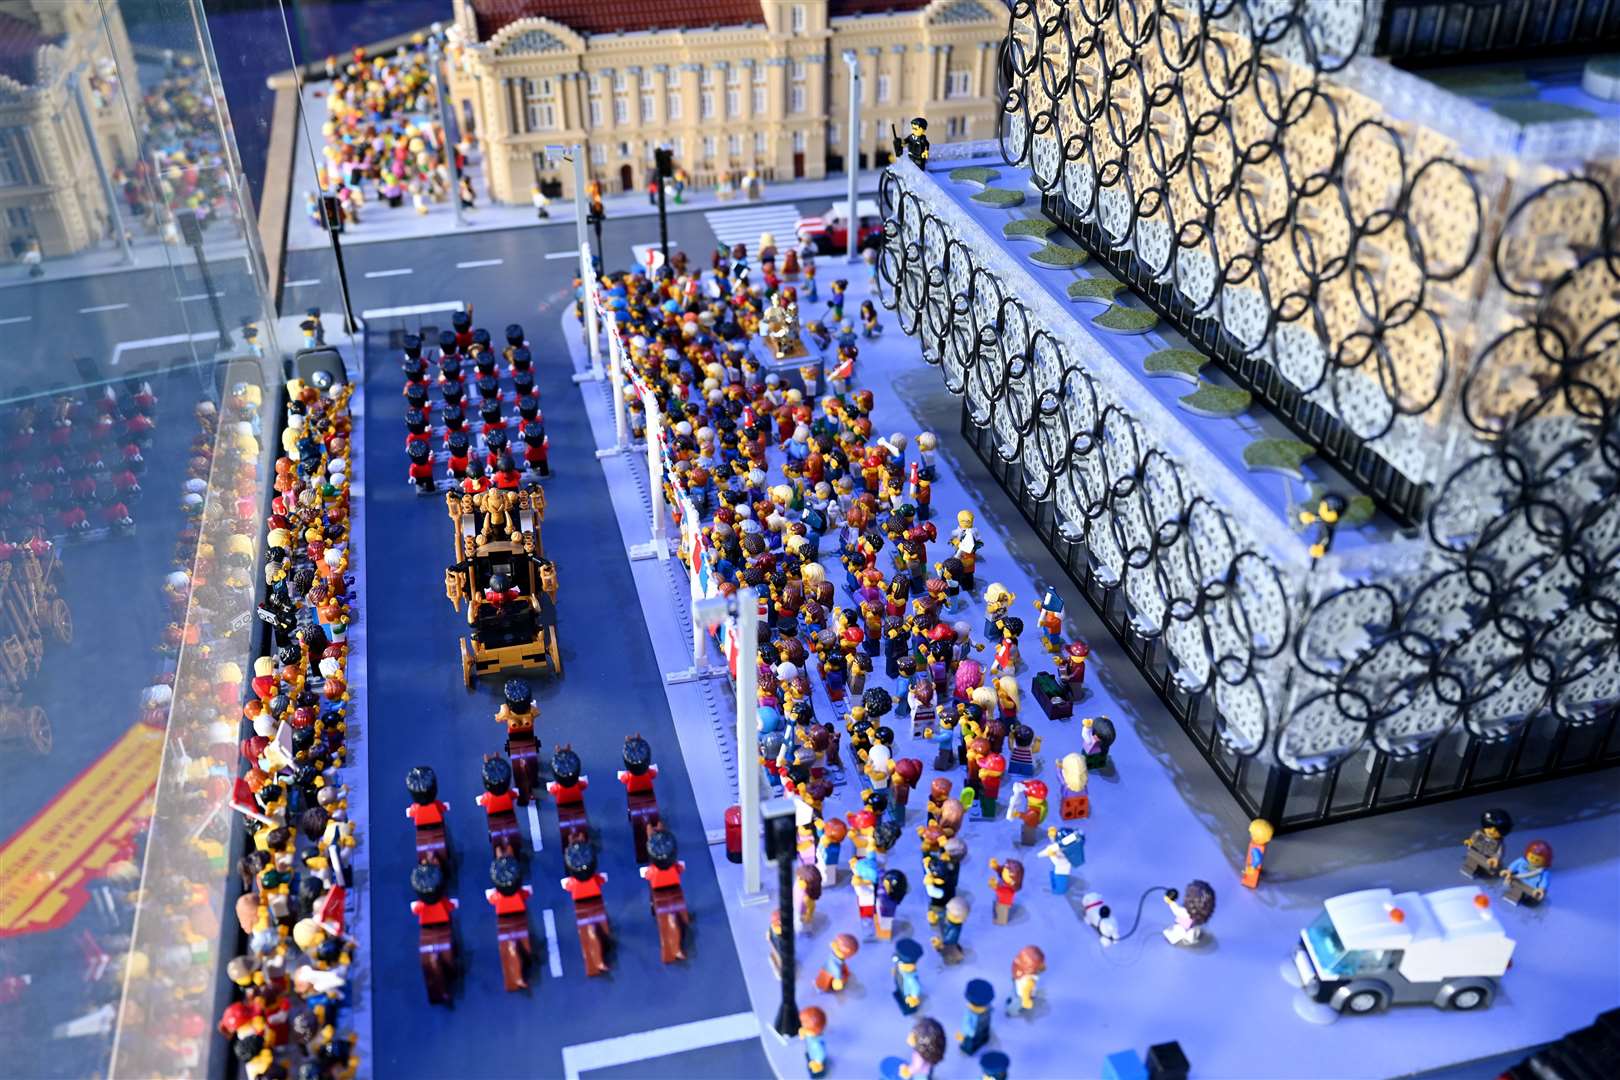 Legoland, which marked the Jubilee with a special display, says its Windsor resort will close for the Queen's funeral